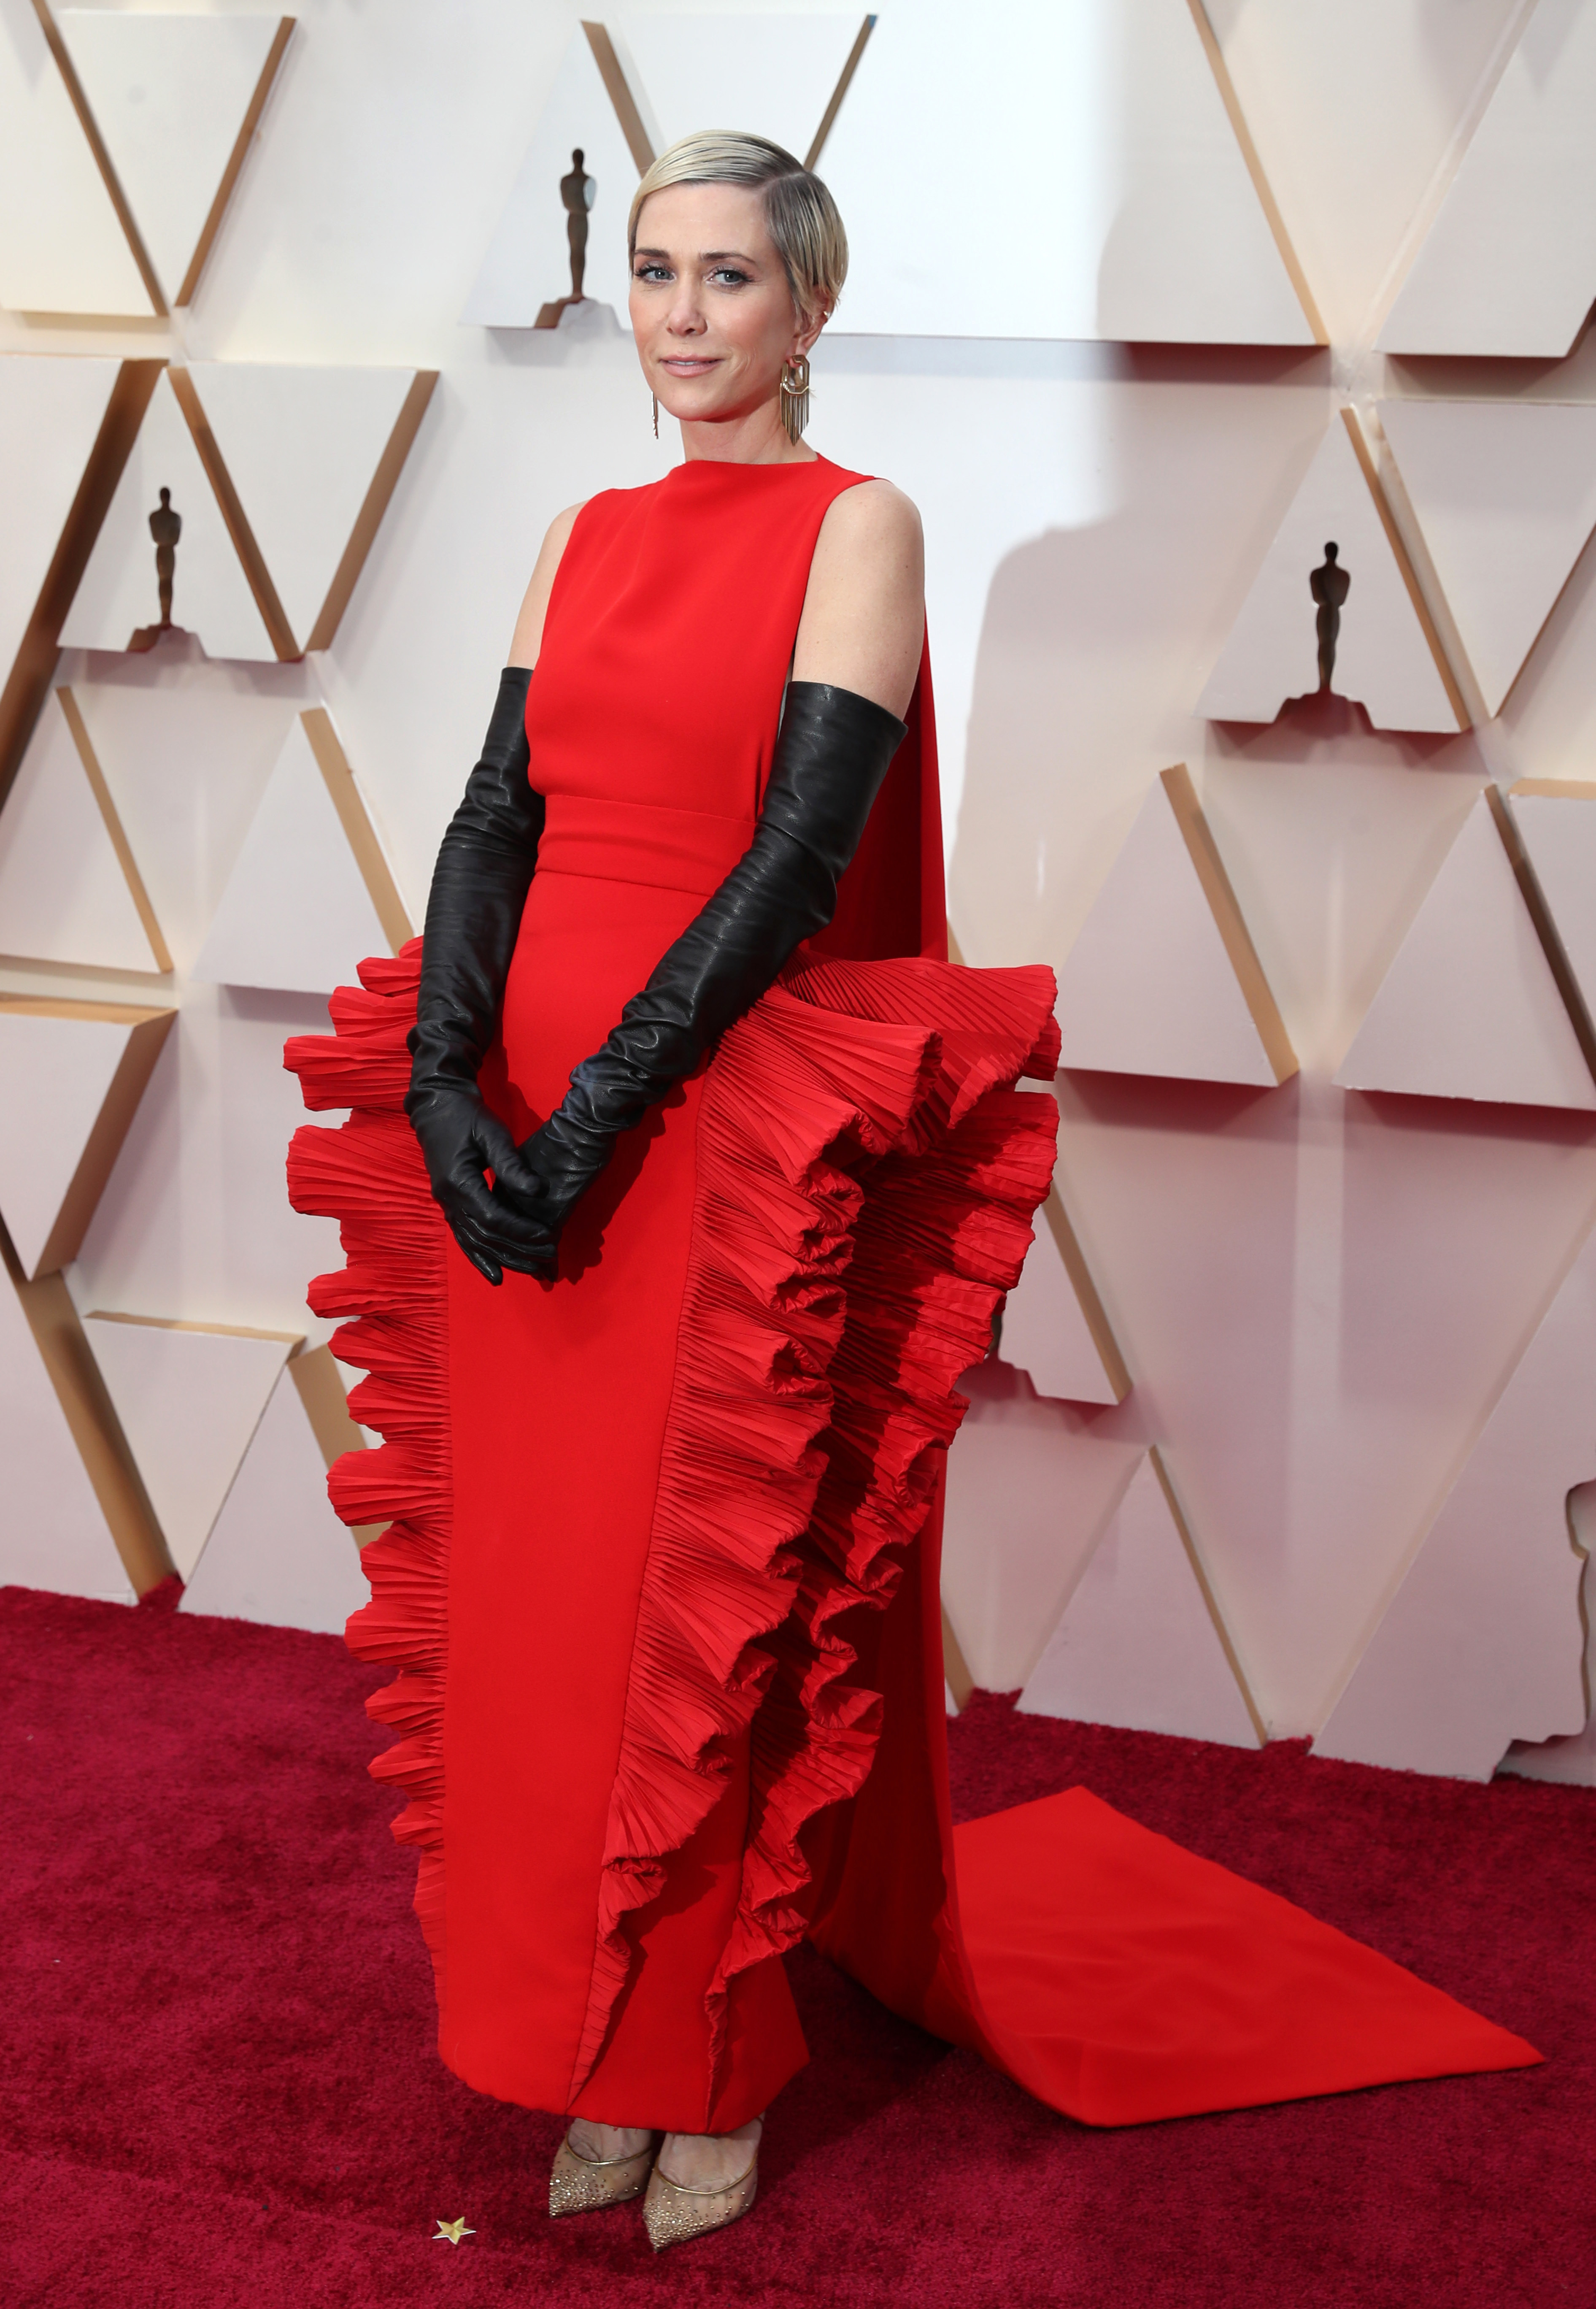 Oscar fashion - Worst celeb style moments of years past | Gallery